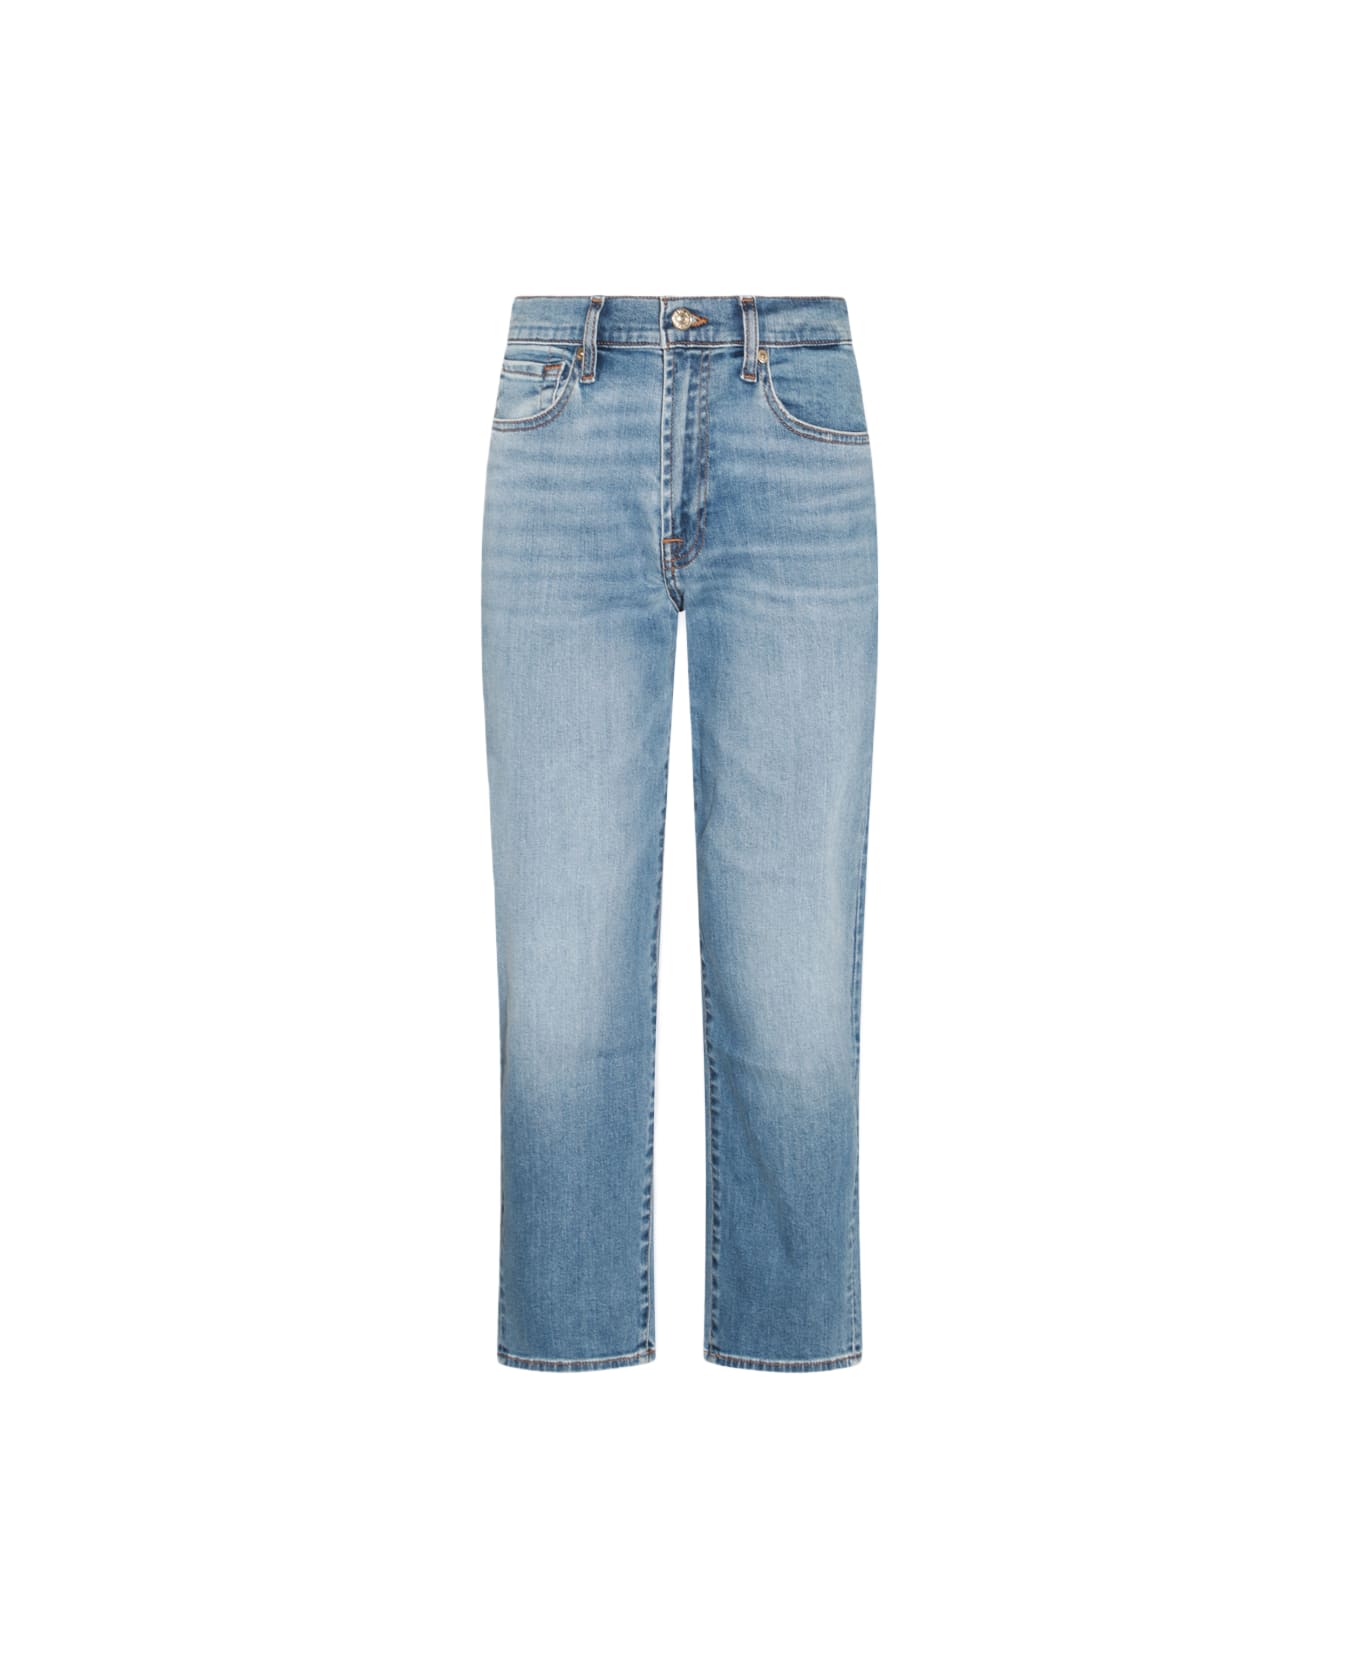 7 For All Mankind Blue Cotton Blend Jeans - DIARY